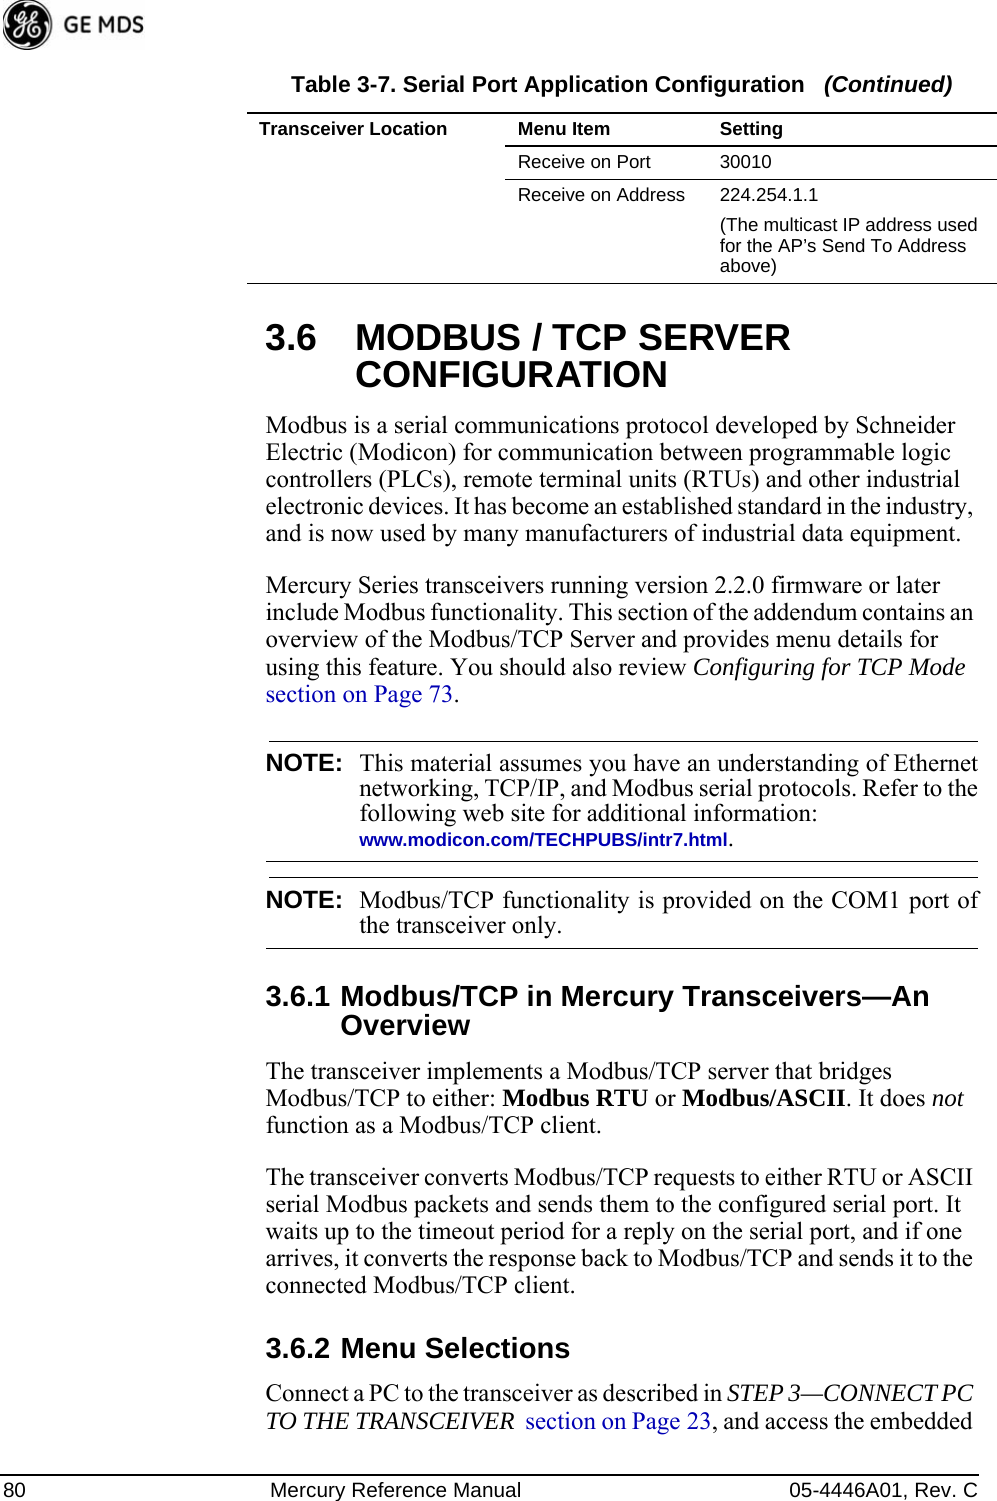 80 Mercury Reference Manual 05-4446A01, Rev. C3.6 MODBUS / TCP SERVER CONFIGURATIONModbus is a serial communications protocol developed by Schneider Electric (Modicon) for communication between programmable logic controllers (PLCs), remote terminal units (RTUs) and other industrial electronic devices. It has become an established standard in the industry, and is now used by many manufacturers of industrial data equipment.Mercury Series transceivers running version 2.2.0 firmware or later include Modbus functionality. This section of the addendum contains an overview of the Modbus/TCP Server and provides menu details for using this feature. You should also review Configuring for TCP Mode  section on Page 73.NOTE: This material assumes you have an understanding of Ethernetnetworking, TCP/IP, and Modbus serial protocols. Refer to thefollowing web site for additional information:www.modicon.com/TECHPUBS/intr7.html.NOTE: Modbus/TCP functionality is provided on the COM1 port ofthe transceiver only.3.6.1 Modbus/TCP in Mercury Transceivers—An OverviewThe transceiver implements a Modbus/TCP server that bridges Modbus/TCP to either: Modbus RTU or Modbus/ASCII. It does not function as a Modbus/TCP client.The transceiver converts Modbus/TCP requests to either RTU or ASCII serial Modbus packets and sends them to the configured serial port. It waits up to the timeout period for a reply on the serial port, and if one arrives, it converts the response back to Modbus/TCP and sends it to the connected Modbus/TCP client.3.6.2 Menu SelectionsConnect a PC to the transceiver as described in STEP 3—CONNECT PC TO THE TRANSCEIVER  section on Page 23, and access the embedded Receive on Port 30010 Receive on Address 224.254.1.1(The multicast IP address used for the AP’s Send To Address above)Table 3-7. Serial Port Application Configuration   (Continued)Transceiver Location Menu Item Setting